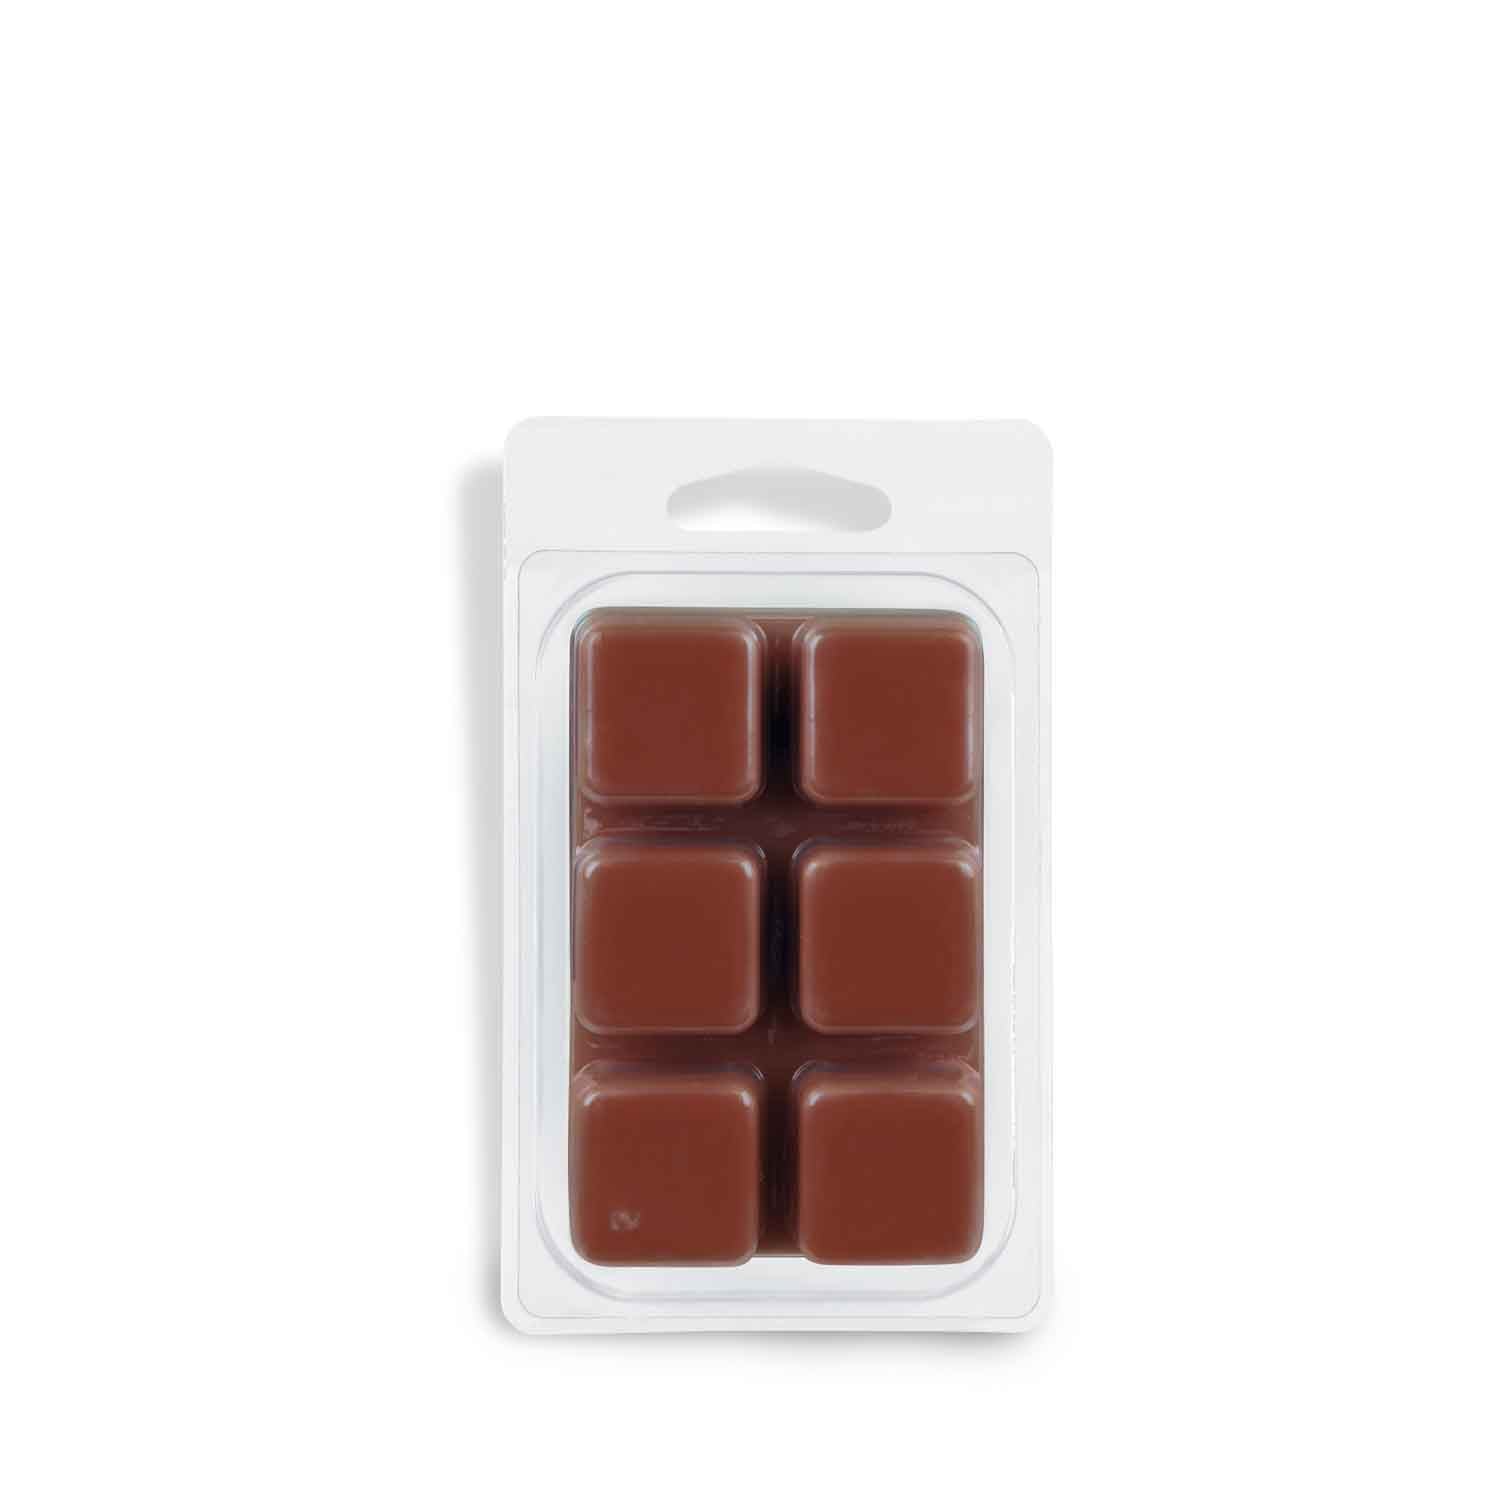 Café Au Lait Scented Wax Melt (2.5 oz) bars in a package on a white background by Tuscany Candle®.